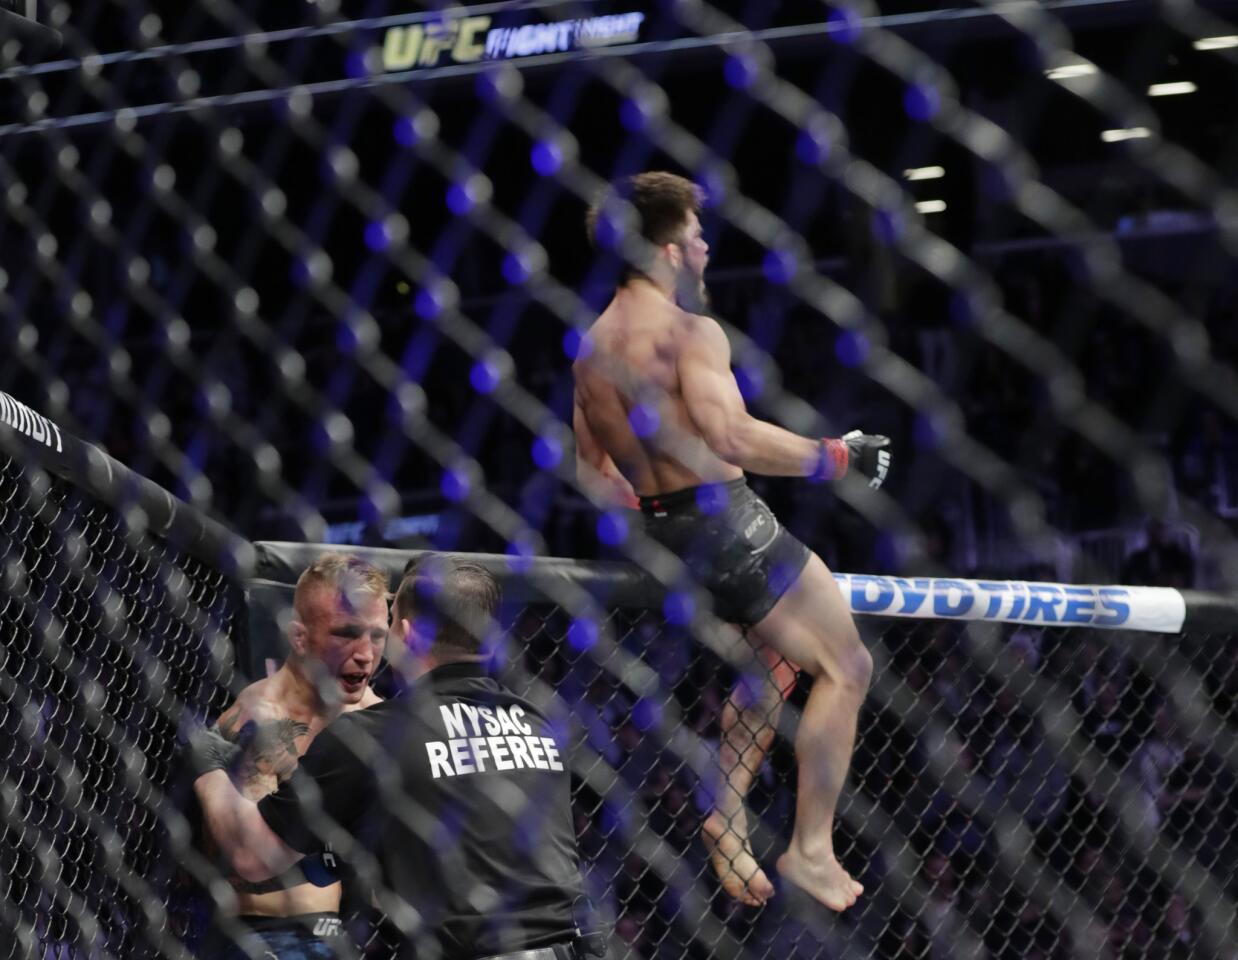 Henry Cejudo, right, celebrates as TJ Dillashaw argues with the referee after the flyweight mixed martial arts championship bout at UFC Fight Night was stopped in the first round early Sunday, Jan. 20, 2019, in New York. Cejudo won. (AP Photo/Frank Franklin II)